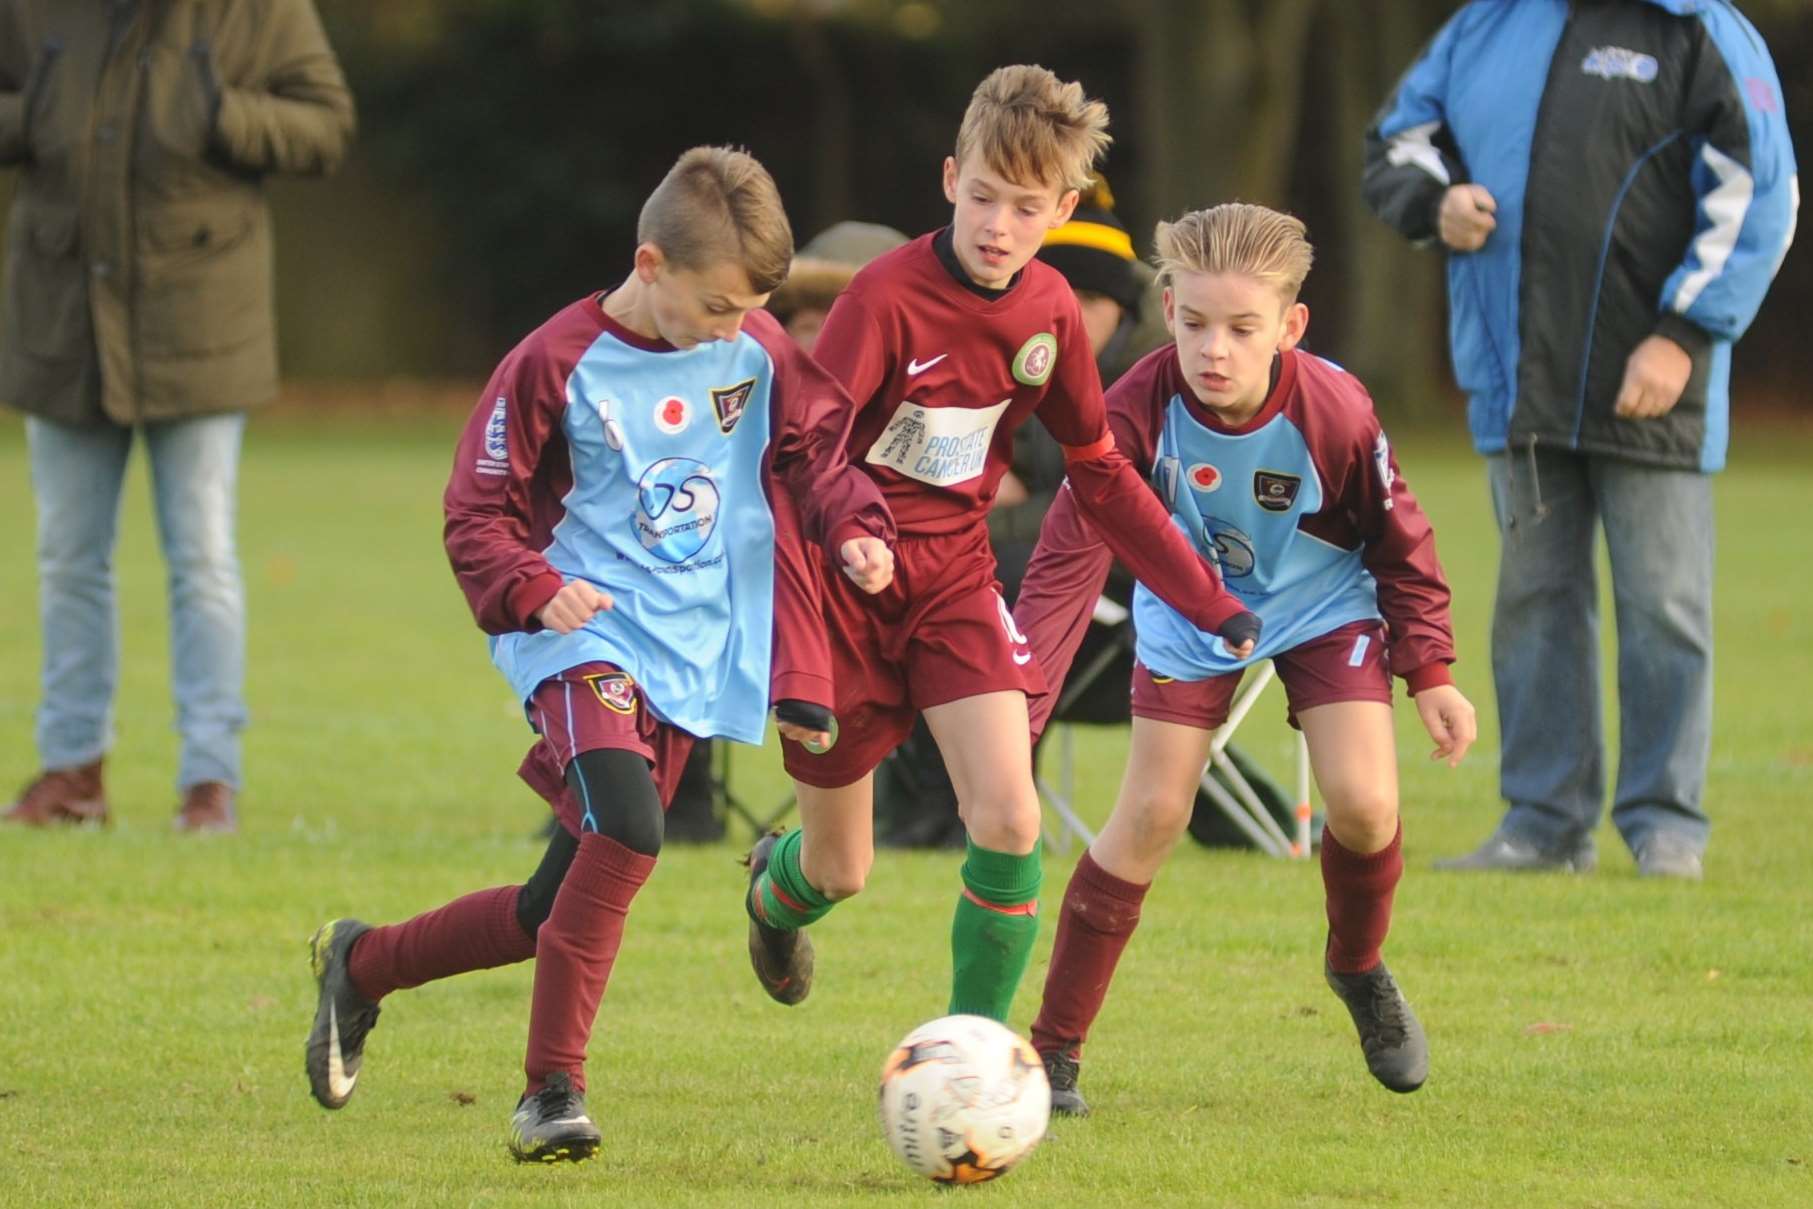 Wigmore Youth taking on Cobham Colts in Under-12 Division 2 Picture: Steve Crispe